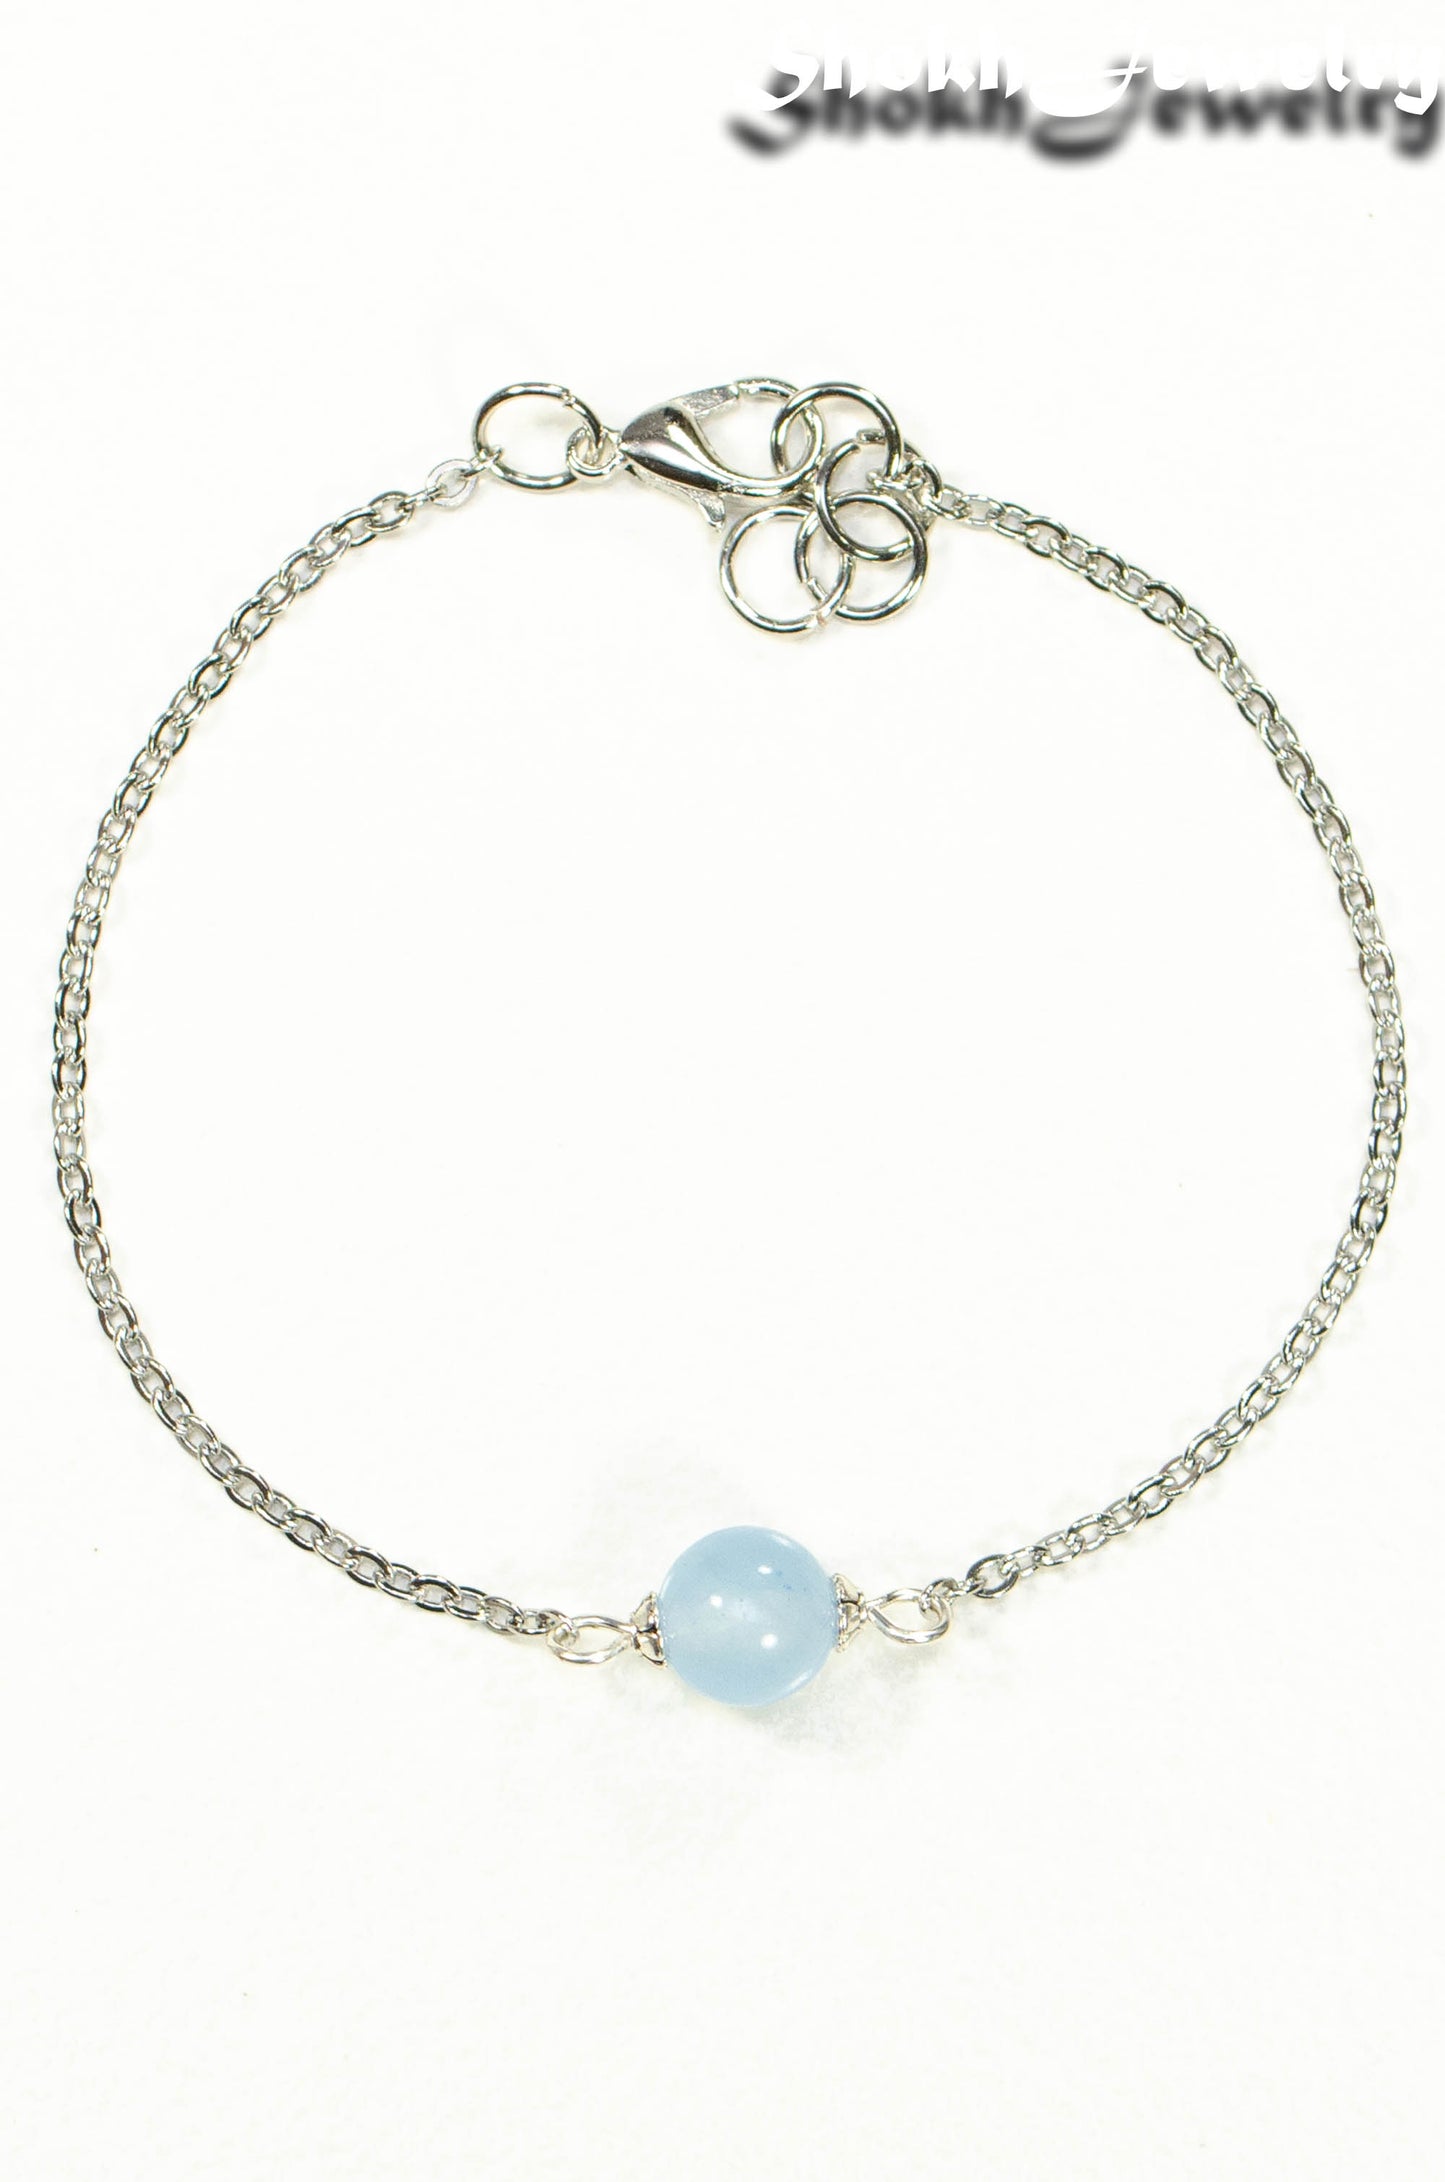 Top view of 8mm Aquamarine and Chain Anklet.